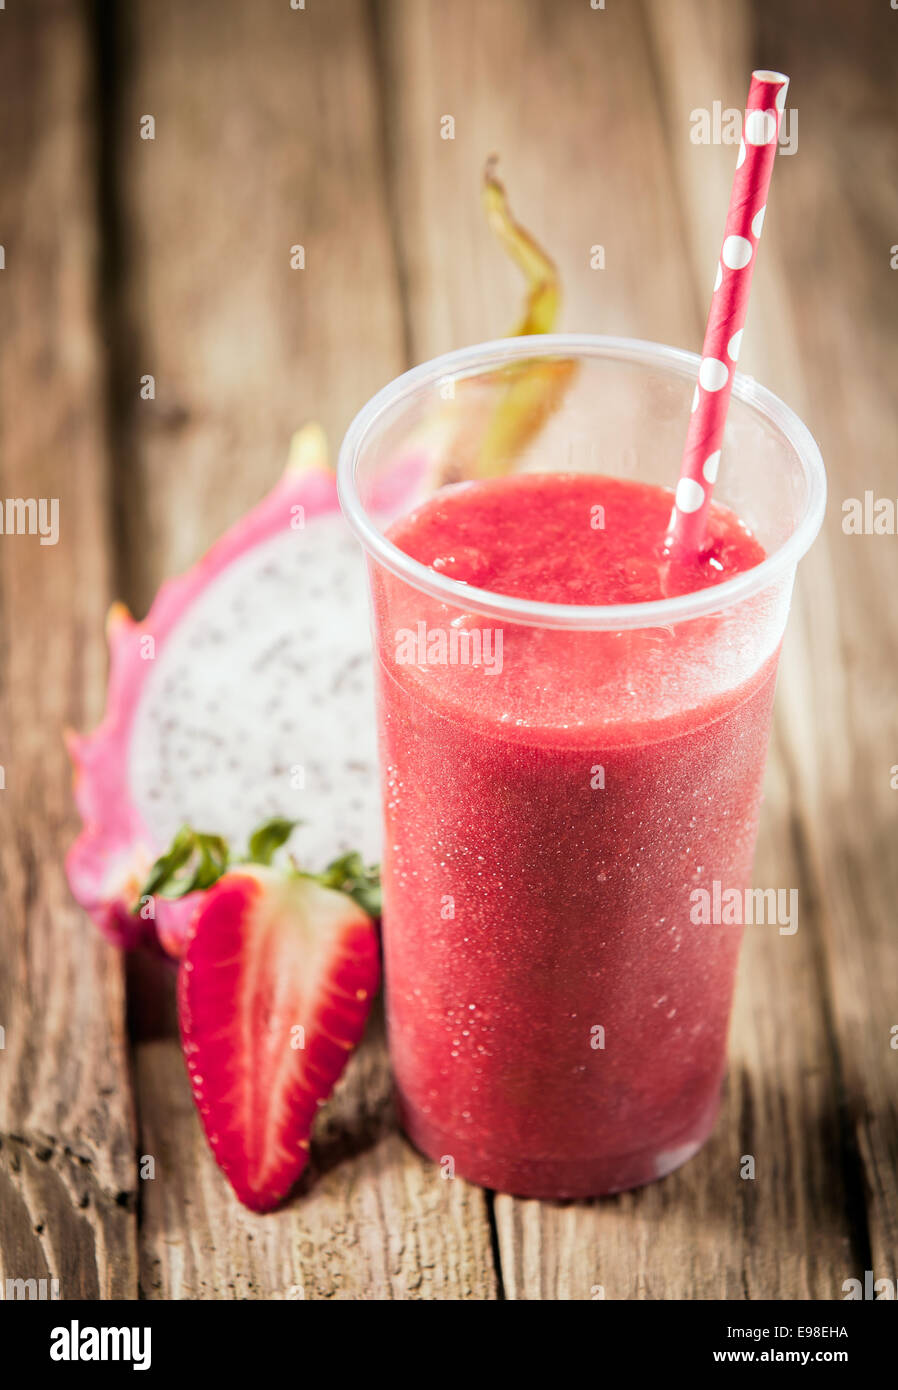 Healthy nutritious tropical smoothie with strawberries and dragon fruit blended with yoghurt or ice cream on a rustic wooden table top Stock Photo